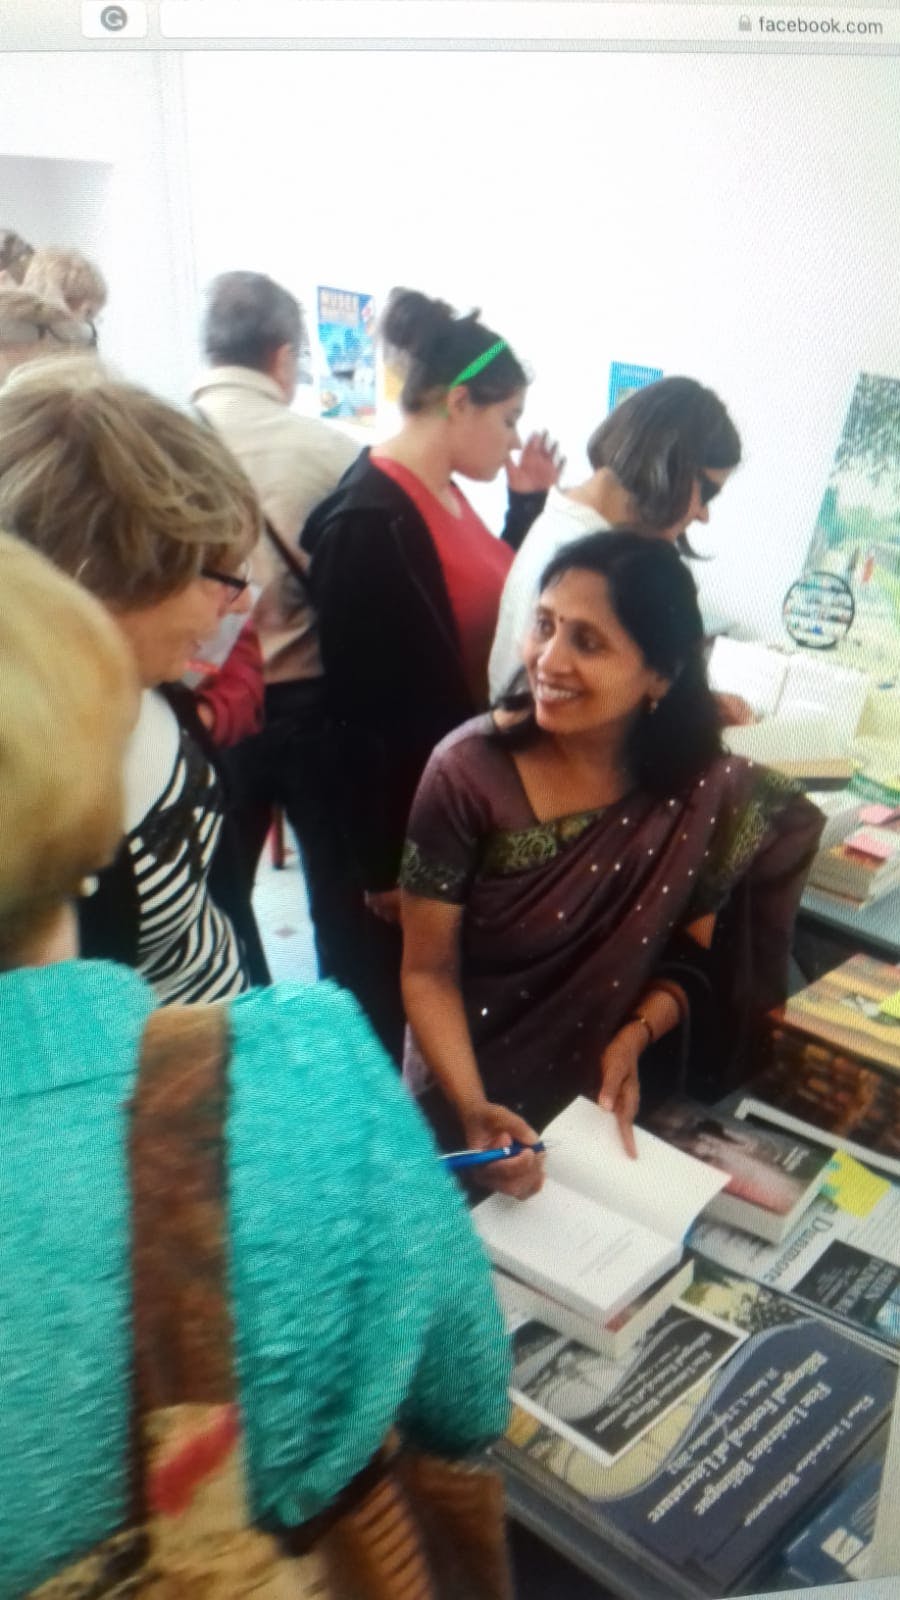 Book signing at St. Clementine in France